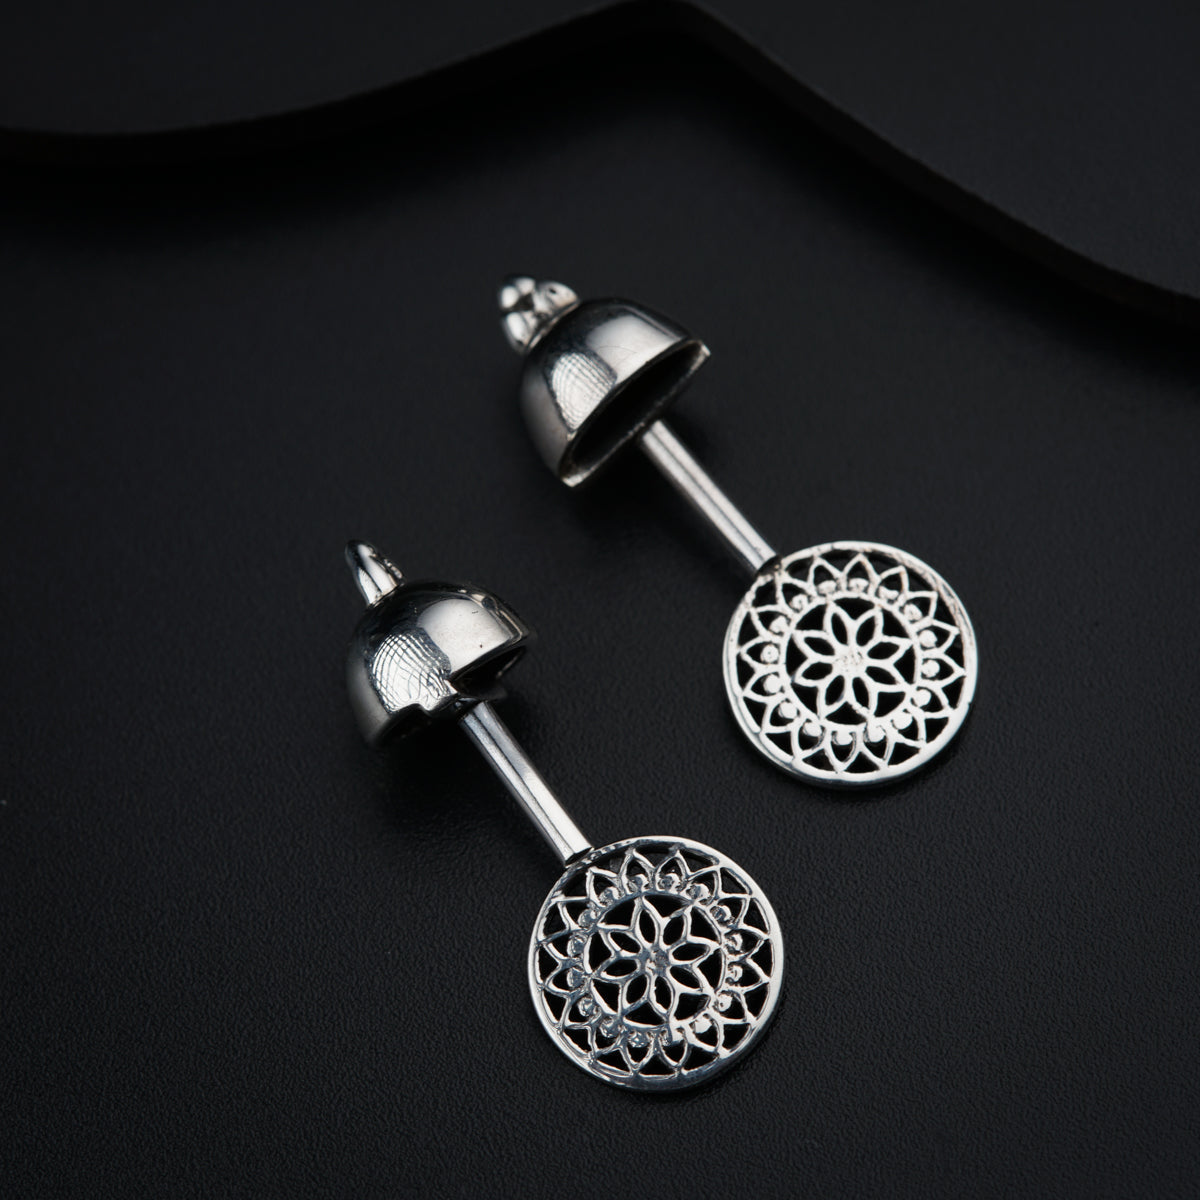 a pair of earrings with a circular design on them